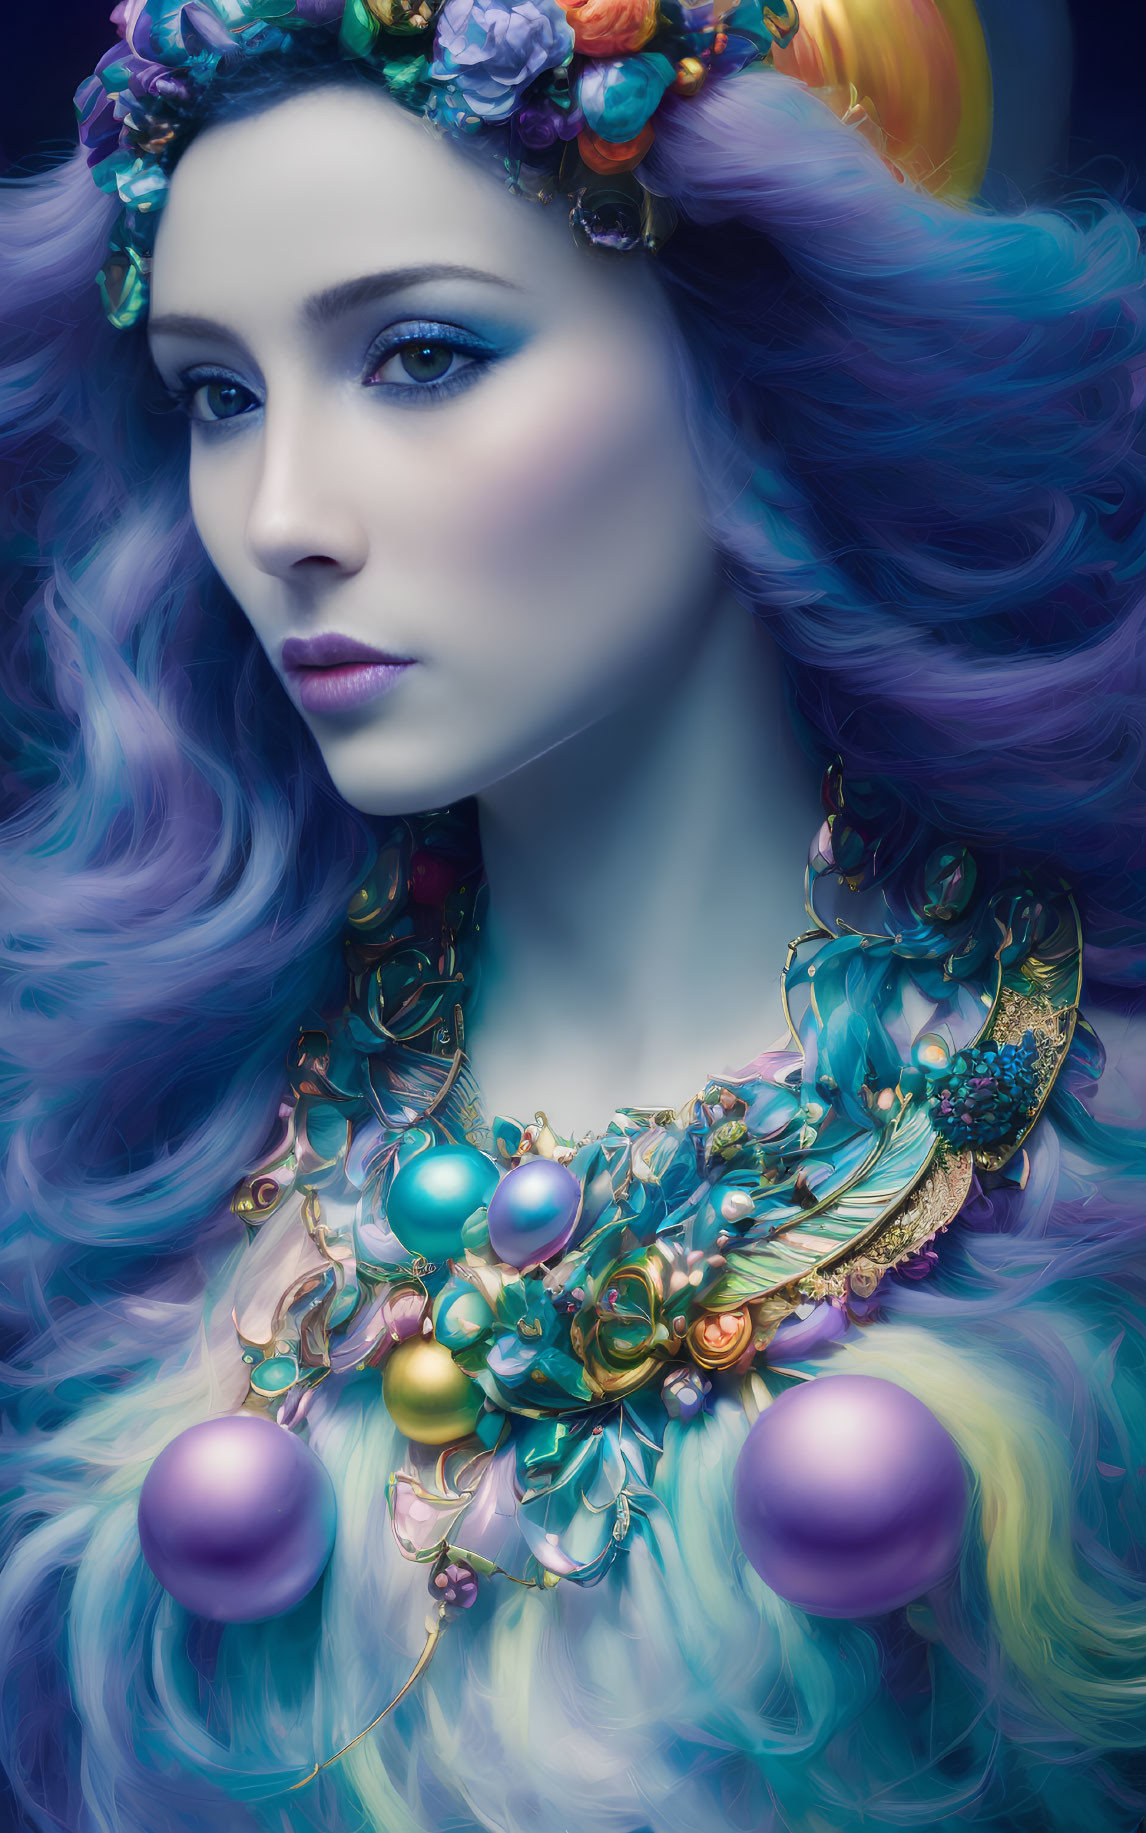 Vibrant Purple Hair Woman with Floral Crown and Statement Necklace